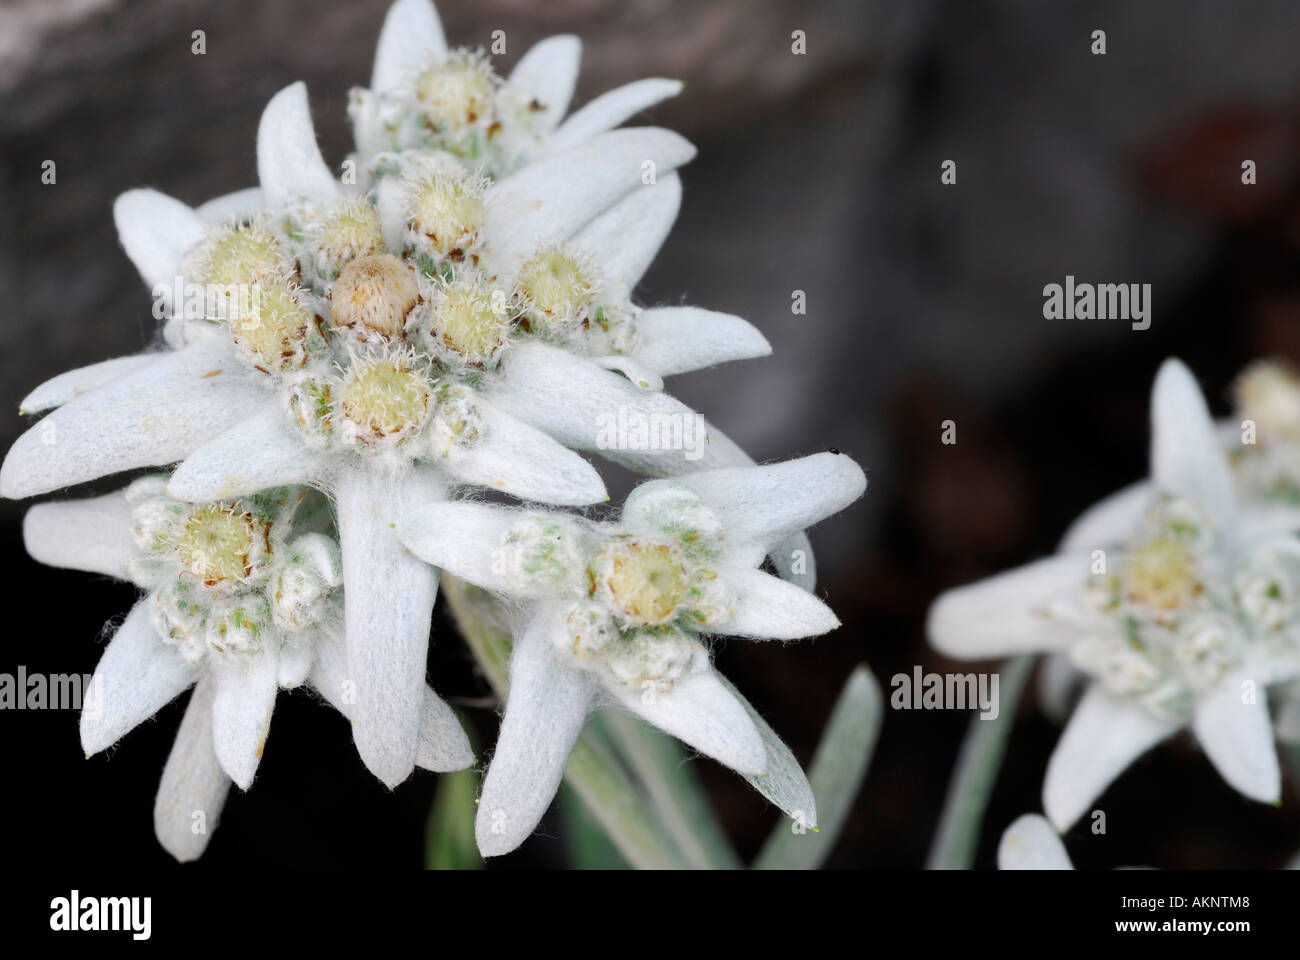 Close up of Edelweiss Leontopodium alpinum flowers with woolly leaves among rocks Stock Photo